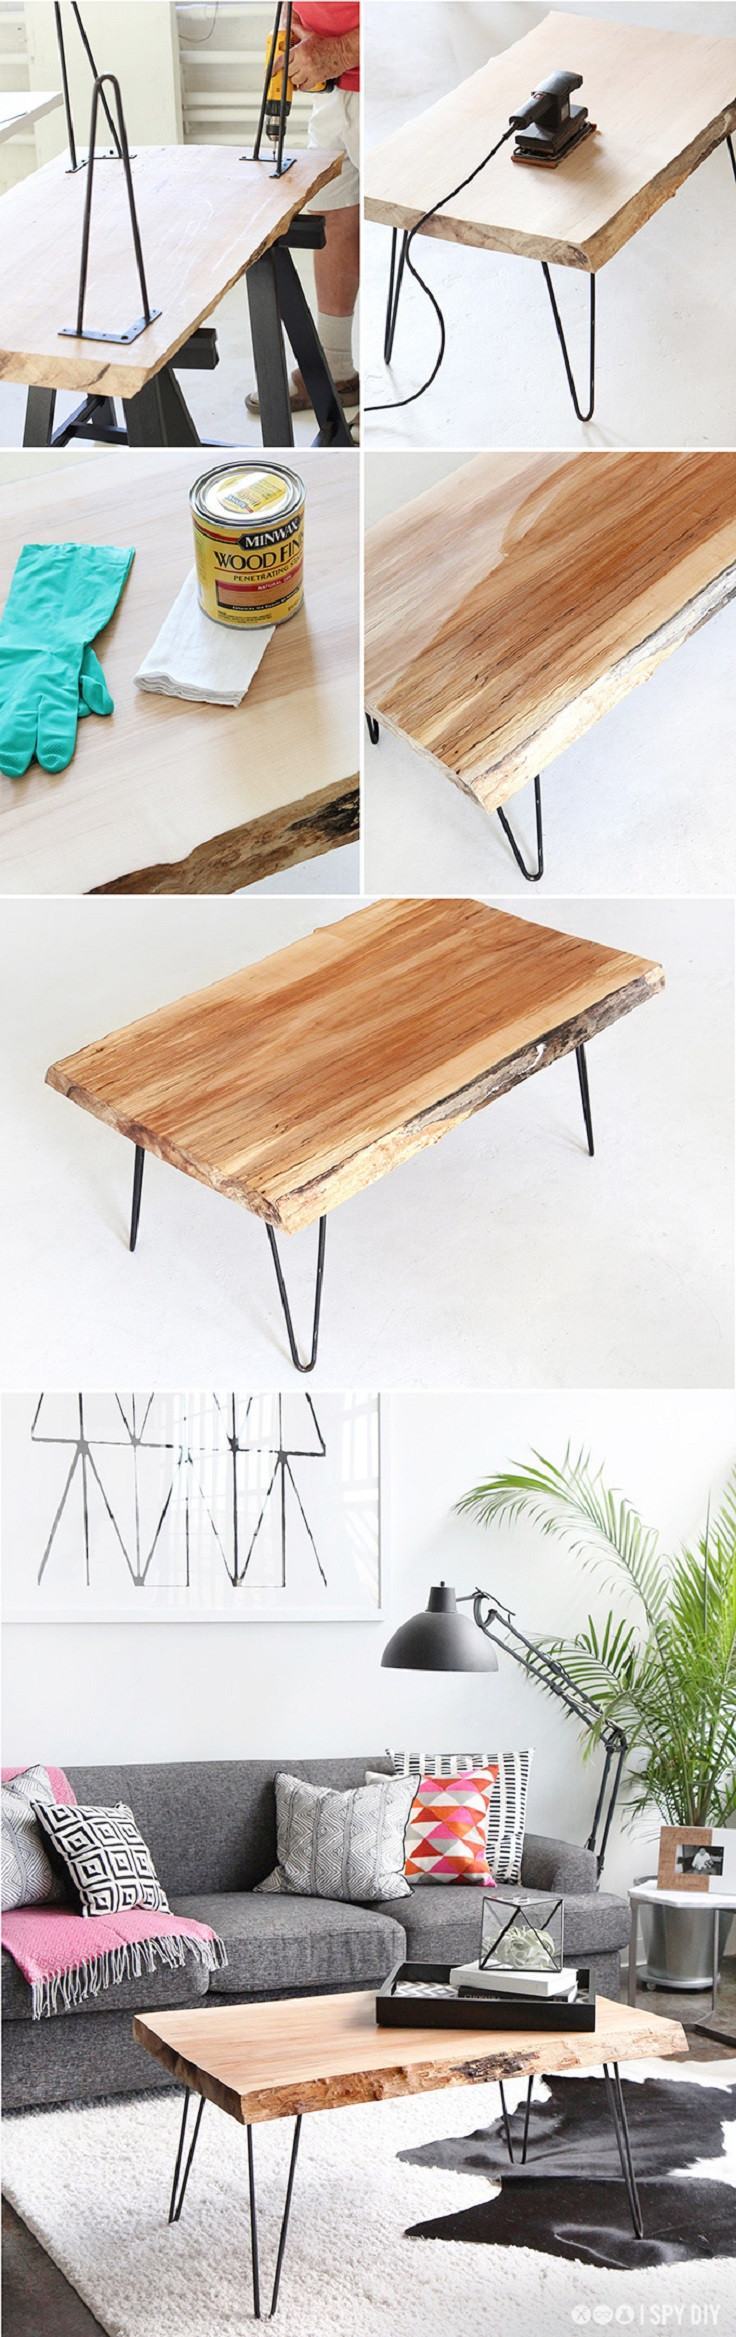 Wood Slab Coffee Table DIY
 10 Pinspired DIY Coffee Tables to Beautify Your Home